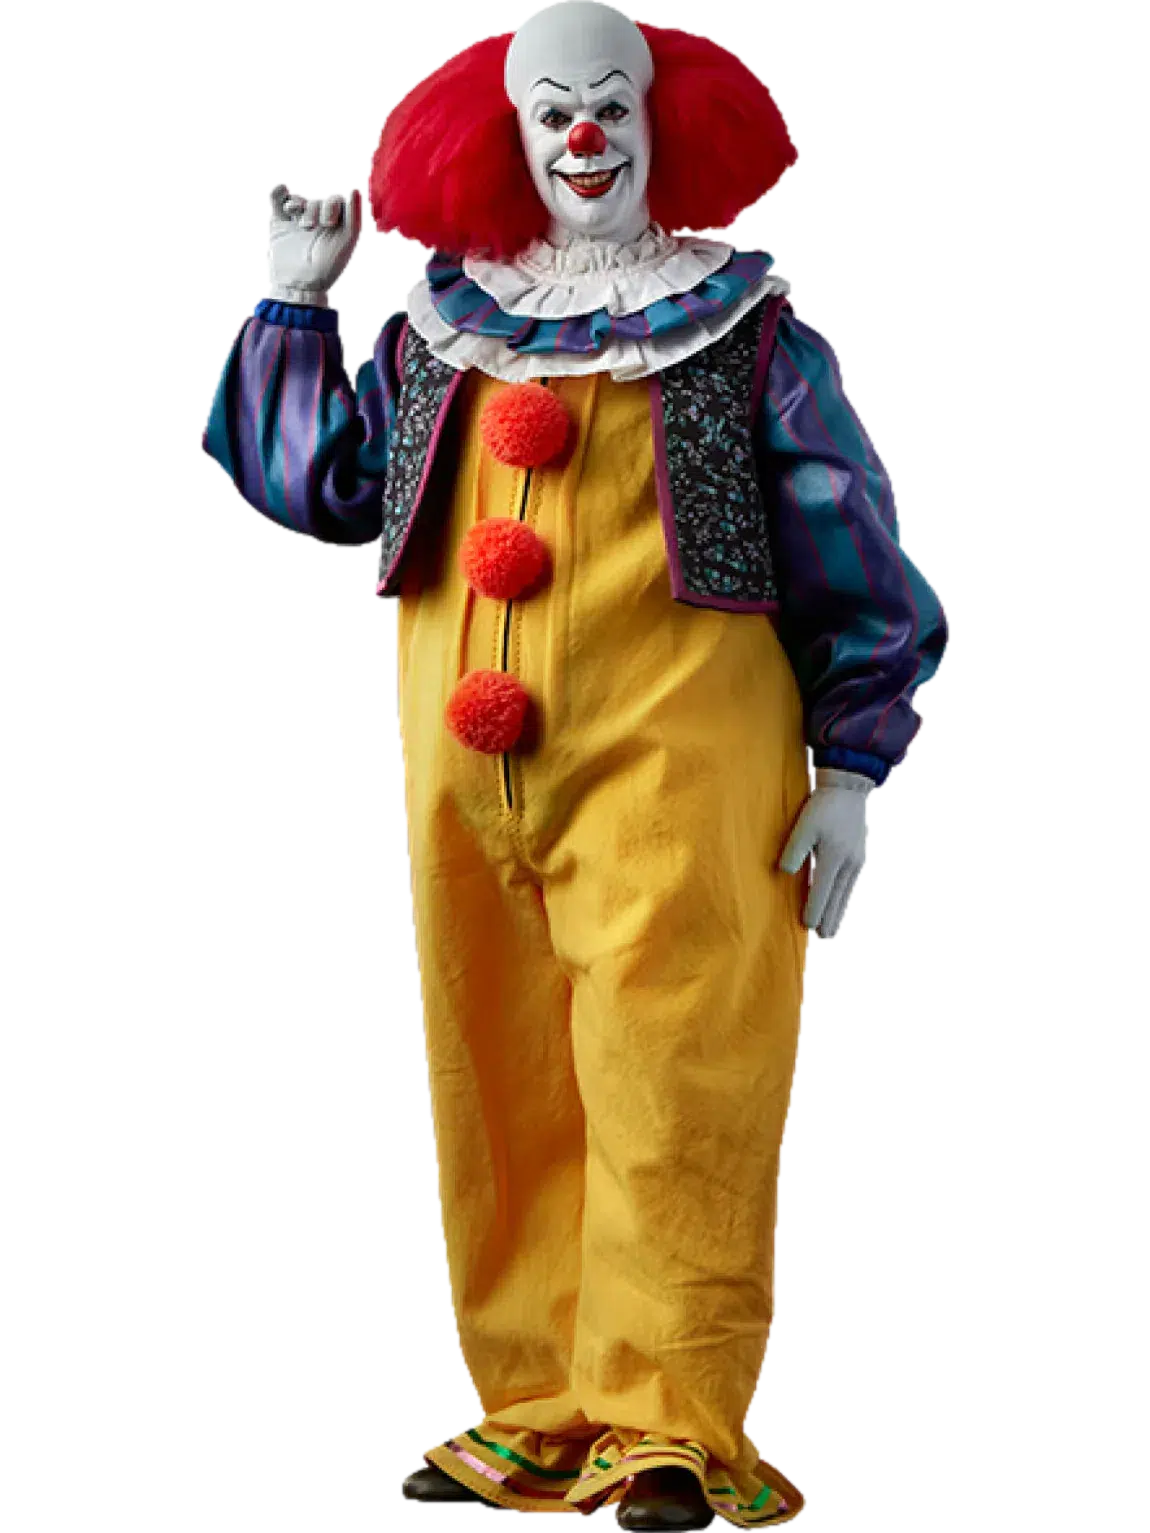 IT: Pennywise: 1990: Sixth Scale Figure Action Figure Sideshow